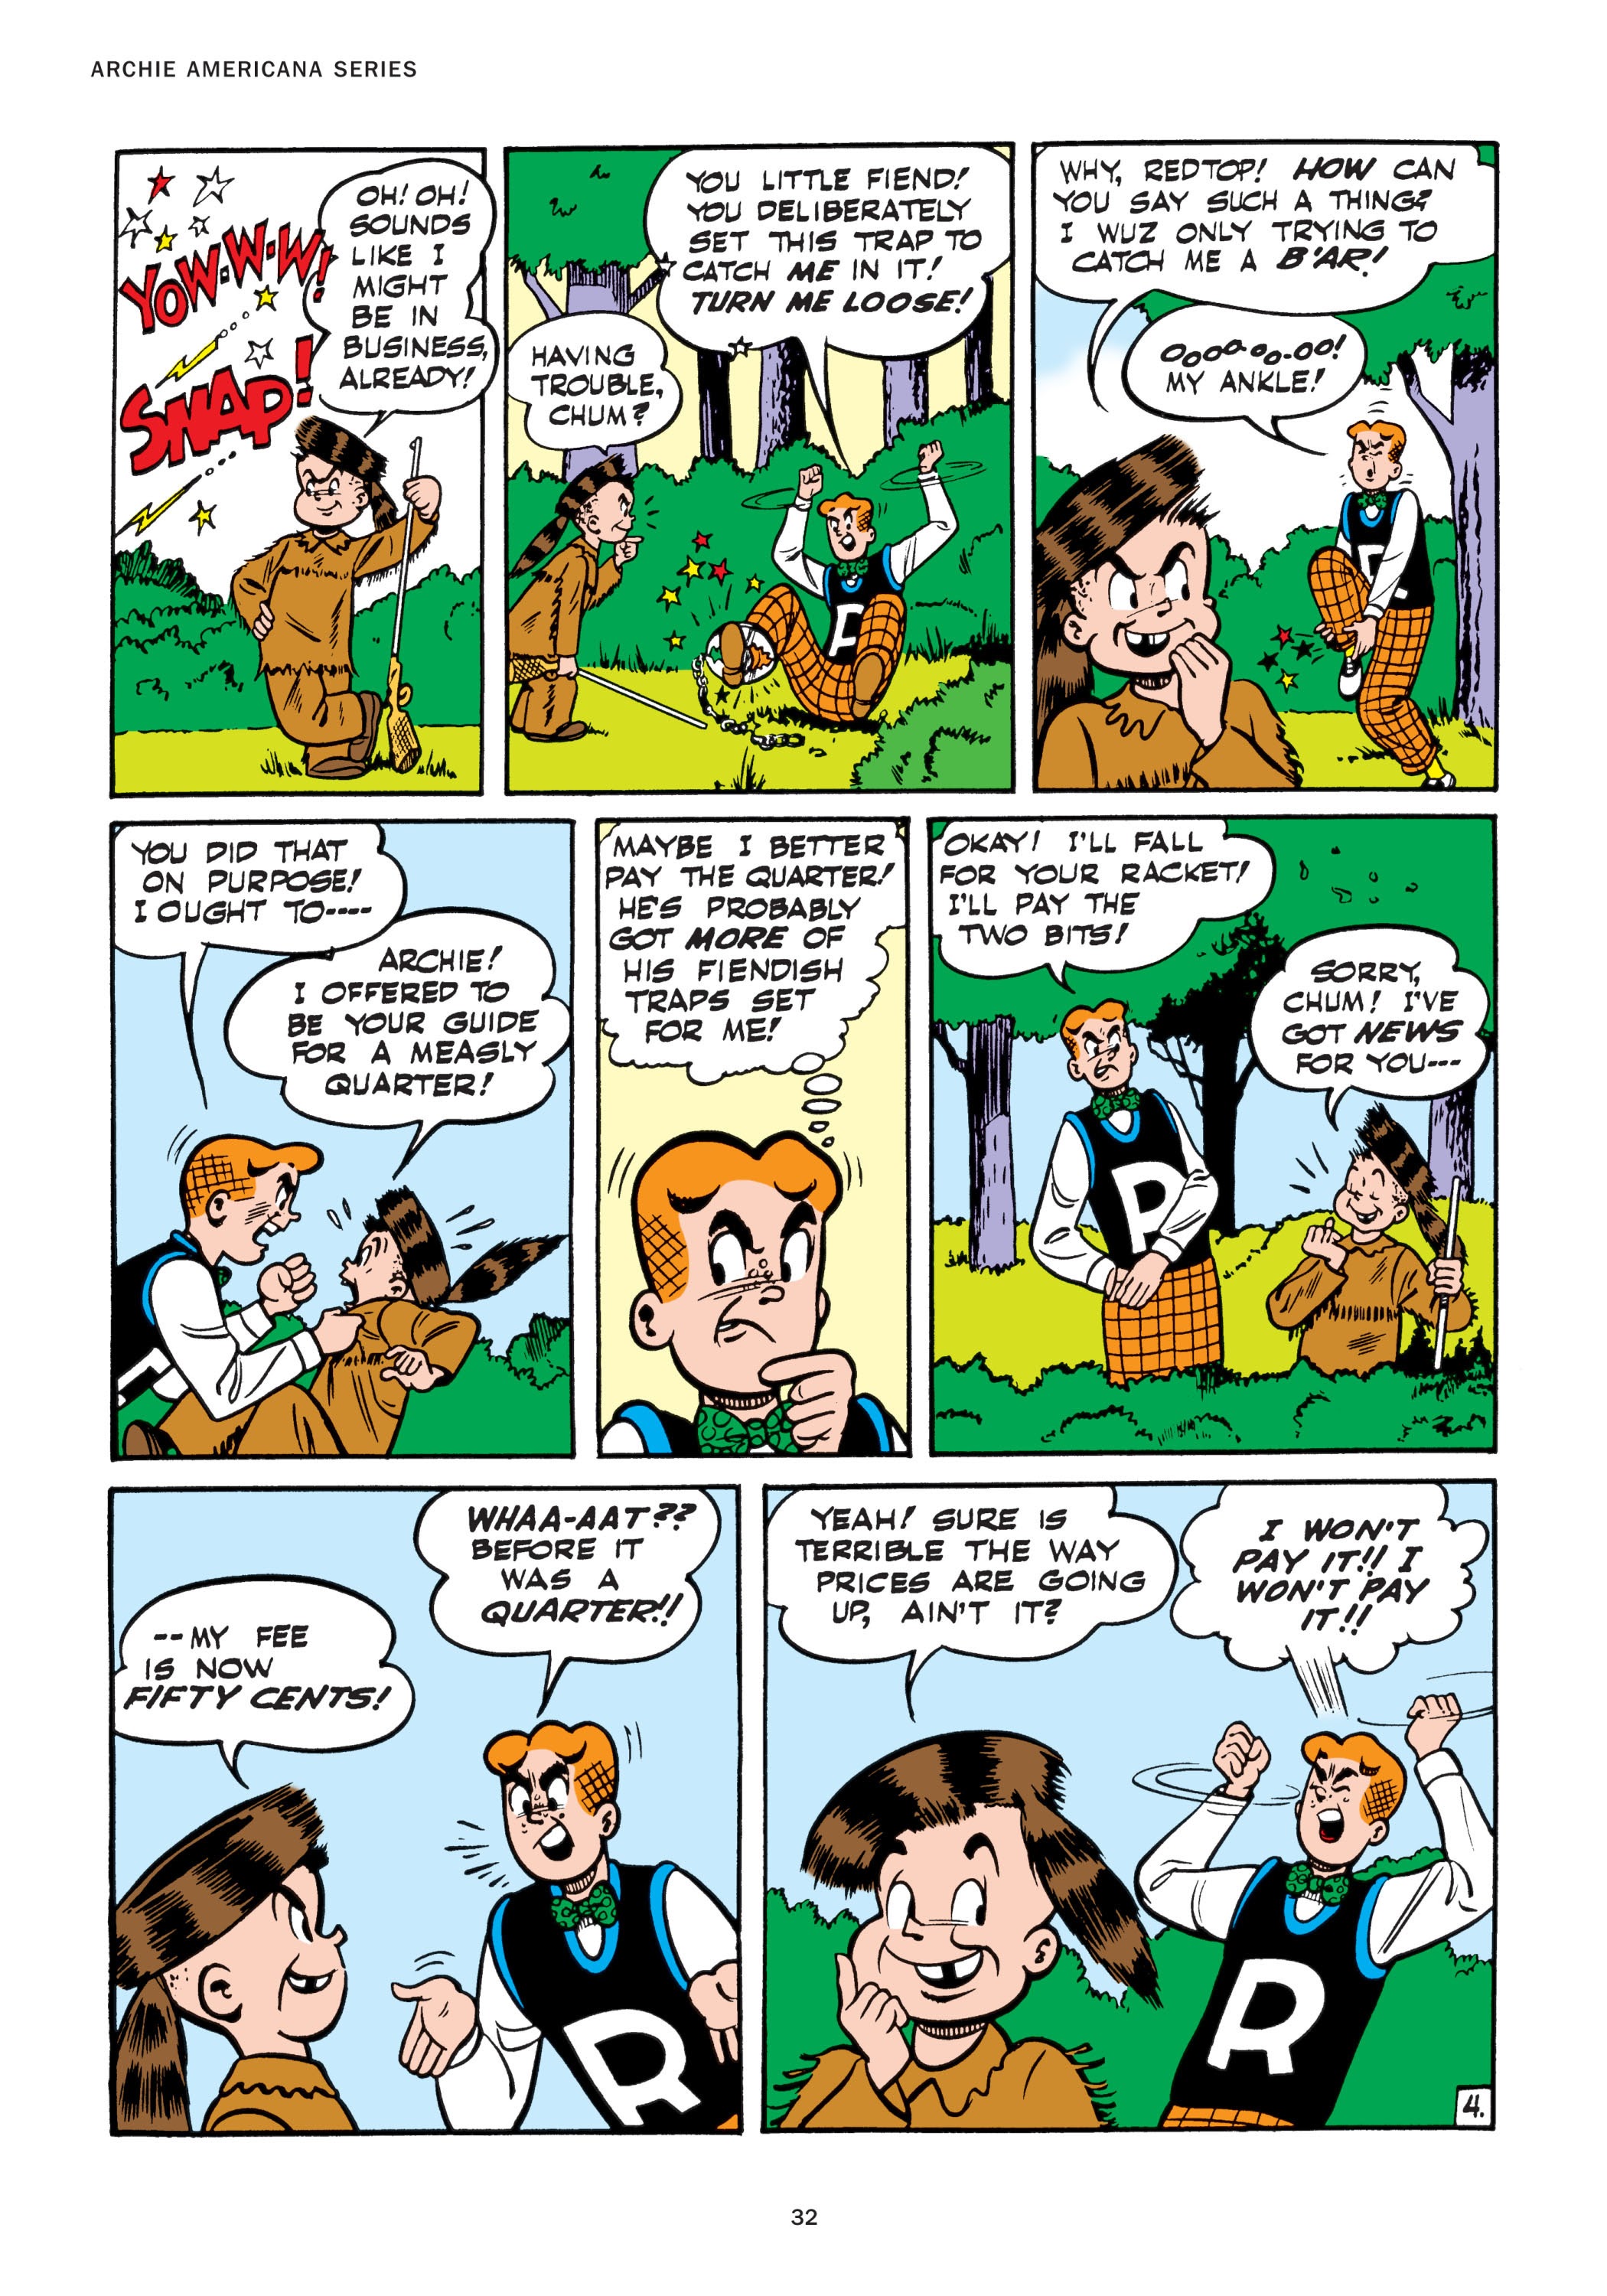 Read online Archie Americana Series comic -  Issue # TPB 7 - 33